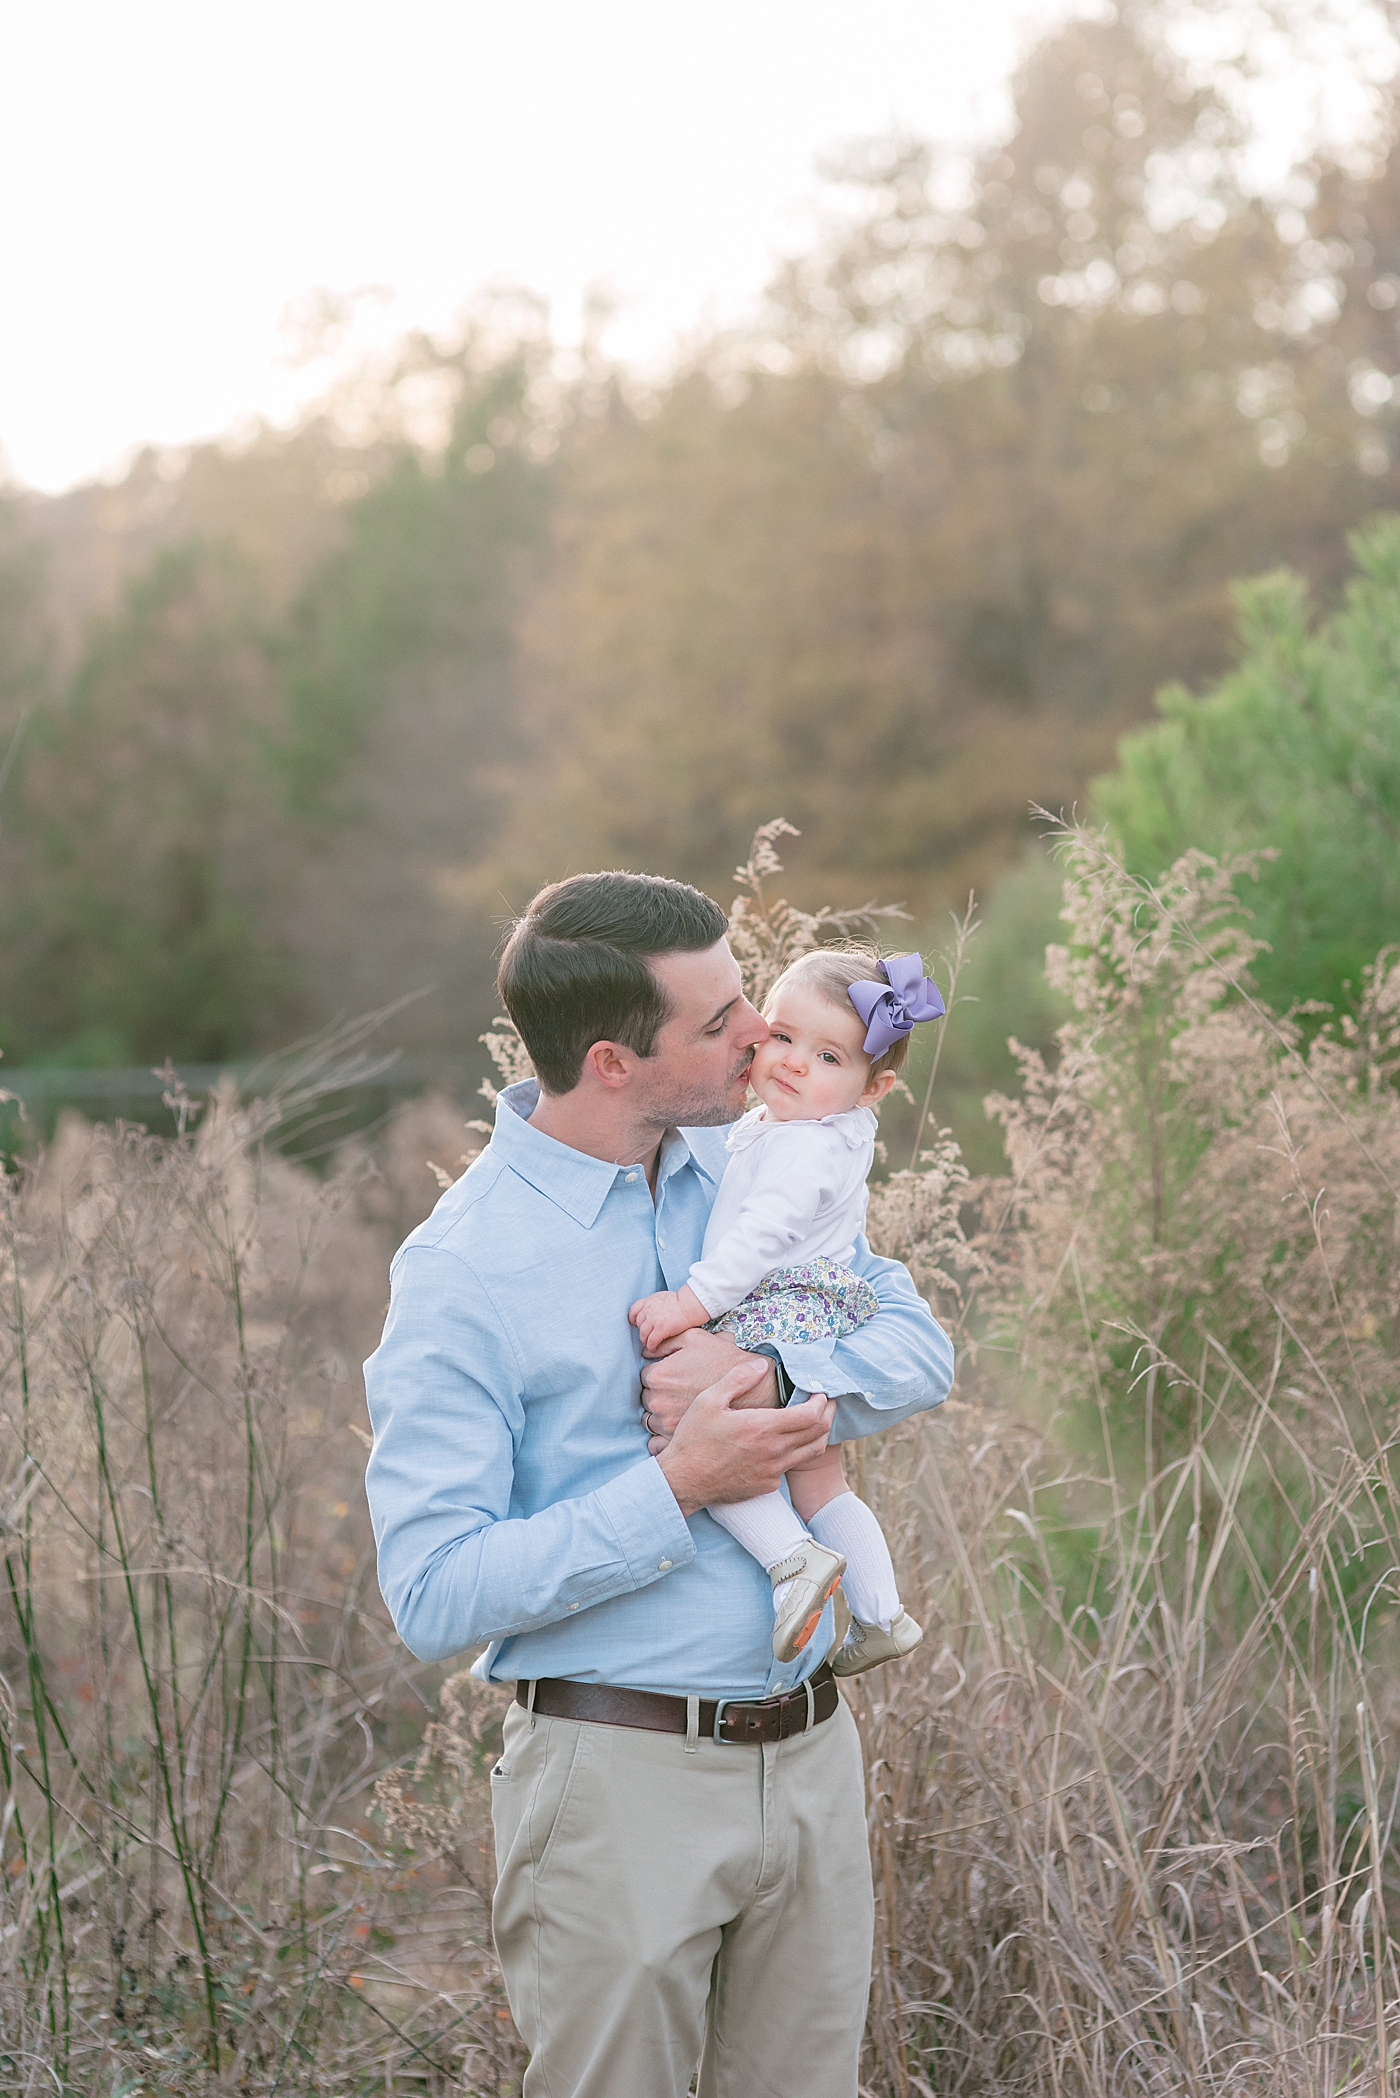 Dad holding his baby girl in floral bloomers during her Milestone Session at Marvin Efird Park | Photo by Anna Wisjo Photography 